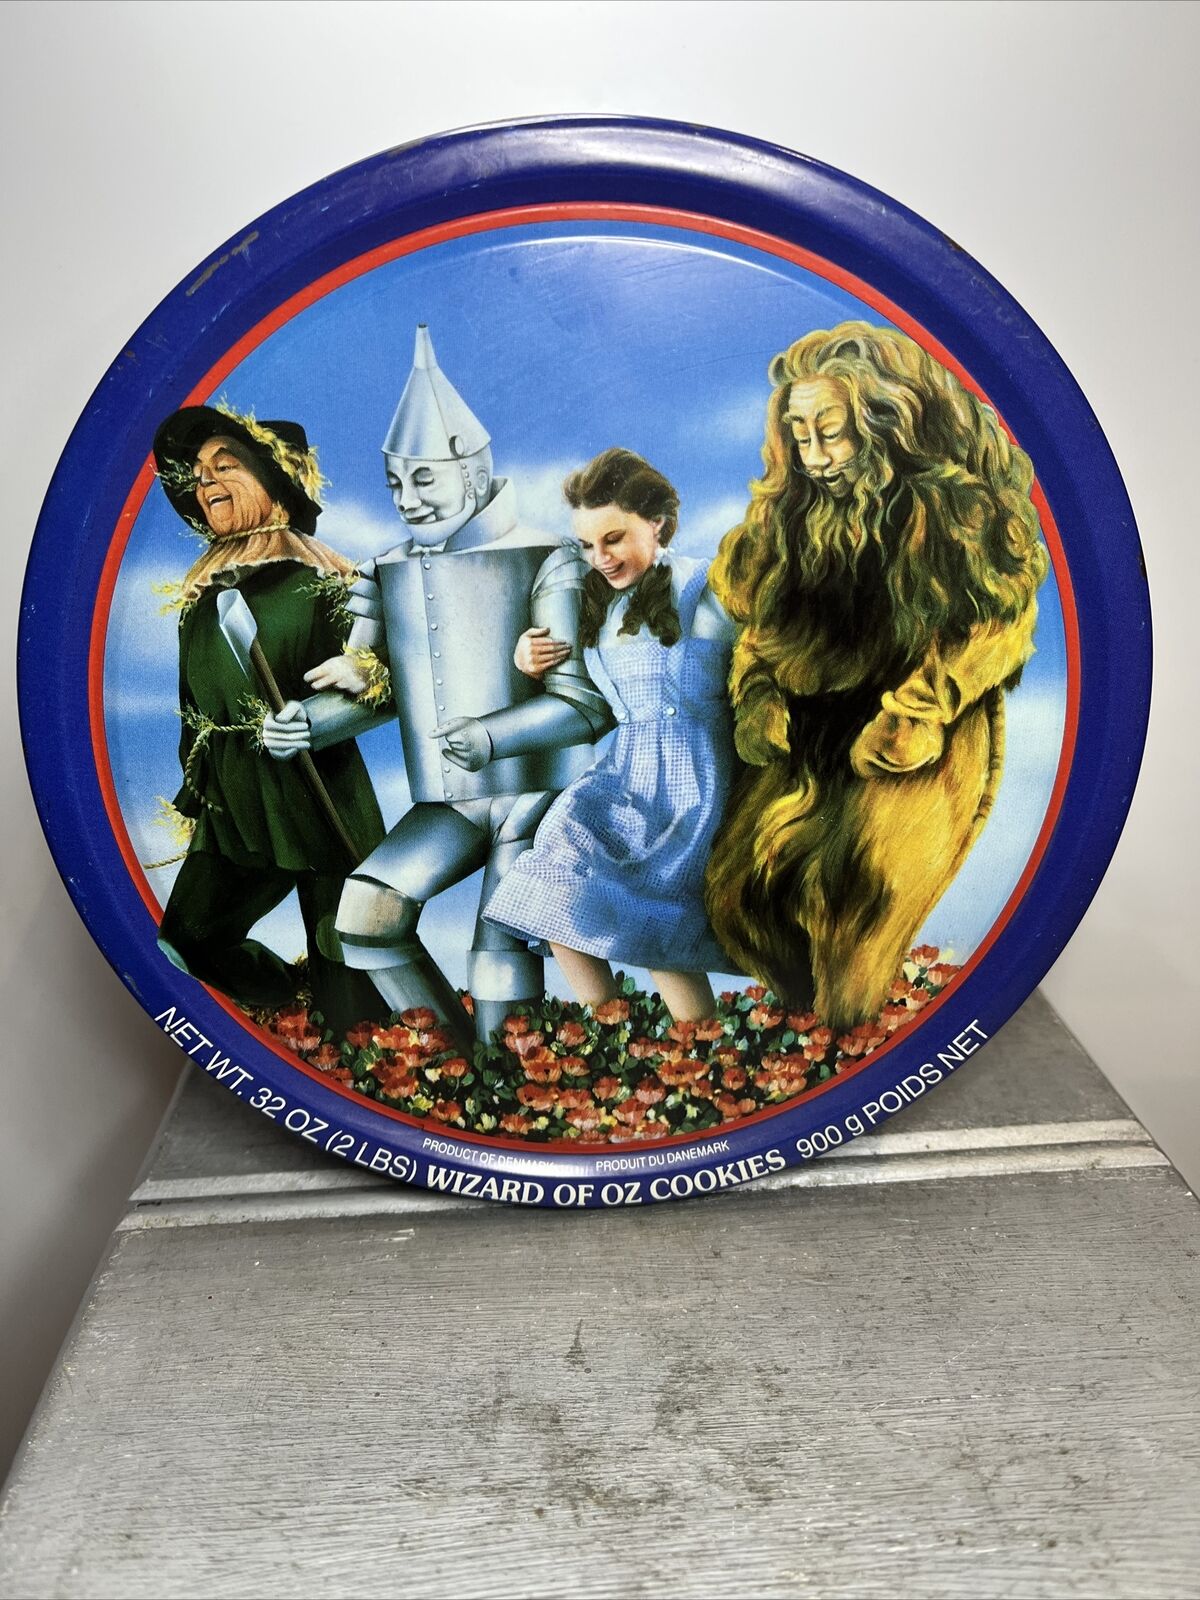 Wizard of Oz 1995 Denmark EMPTY Vintage Collectable Tin Container Display